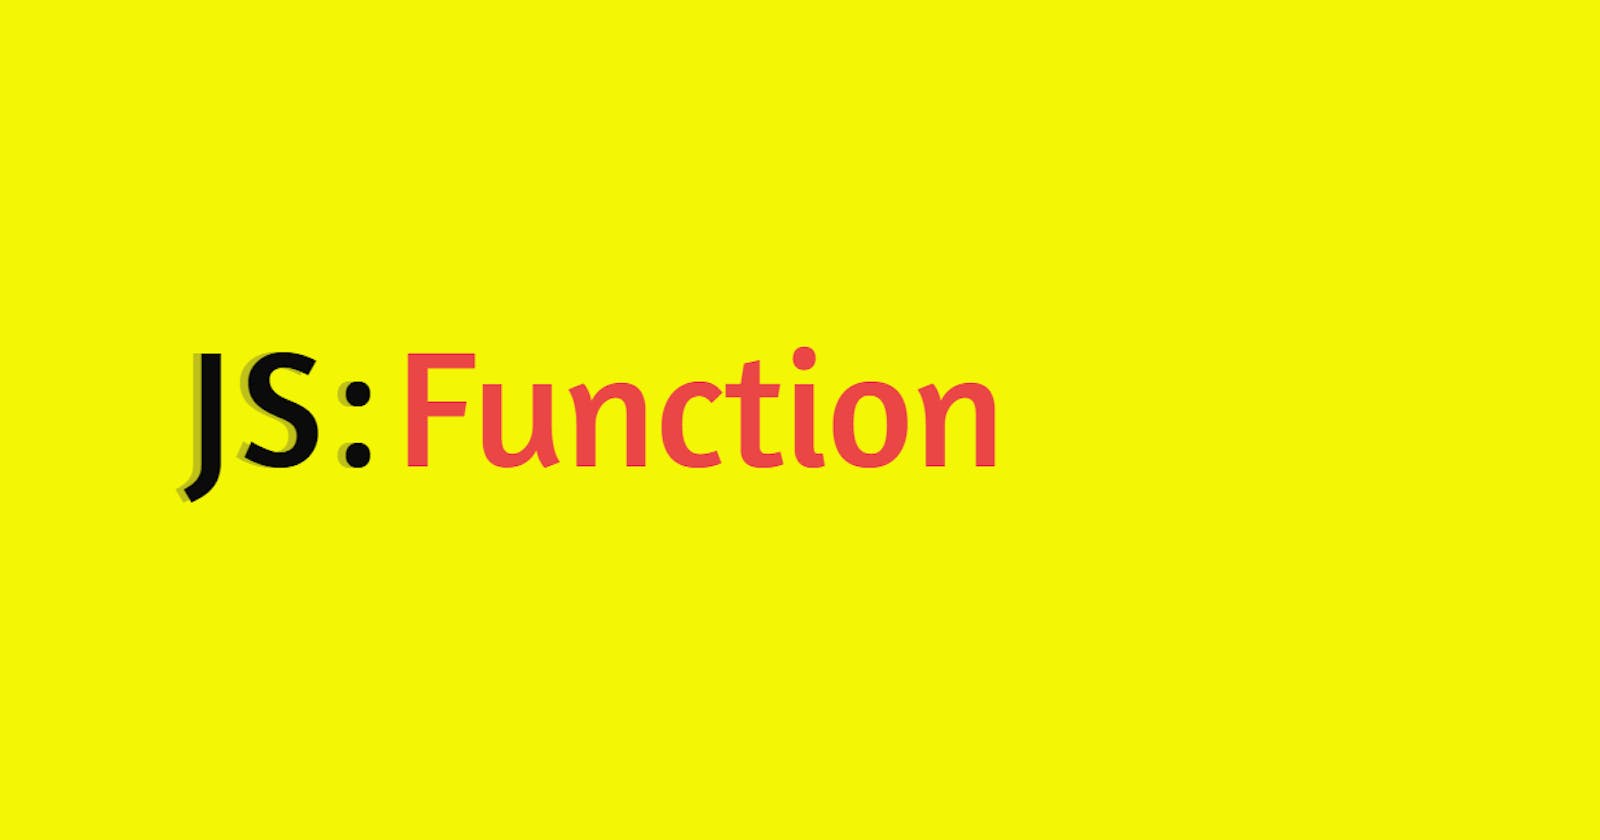 What exactly is a function in JavaScript?